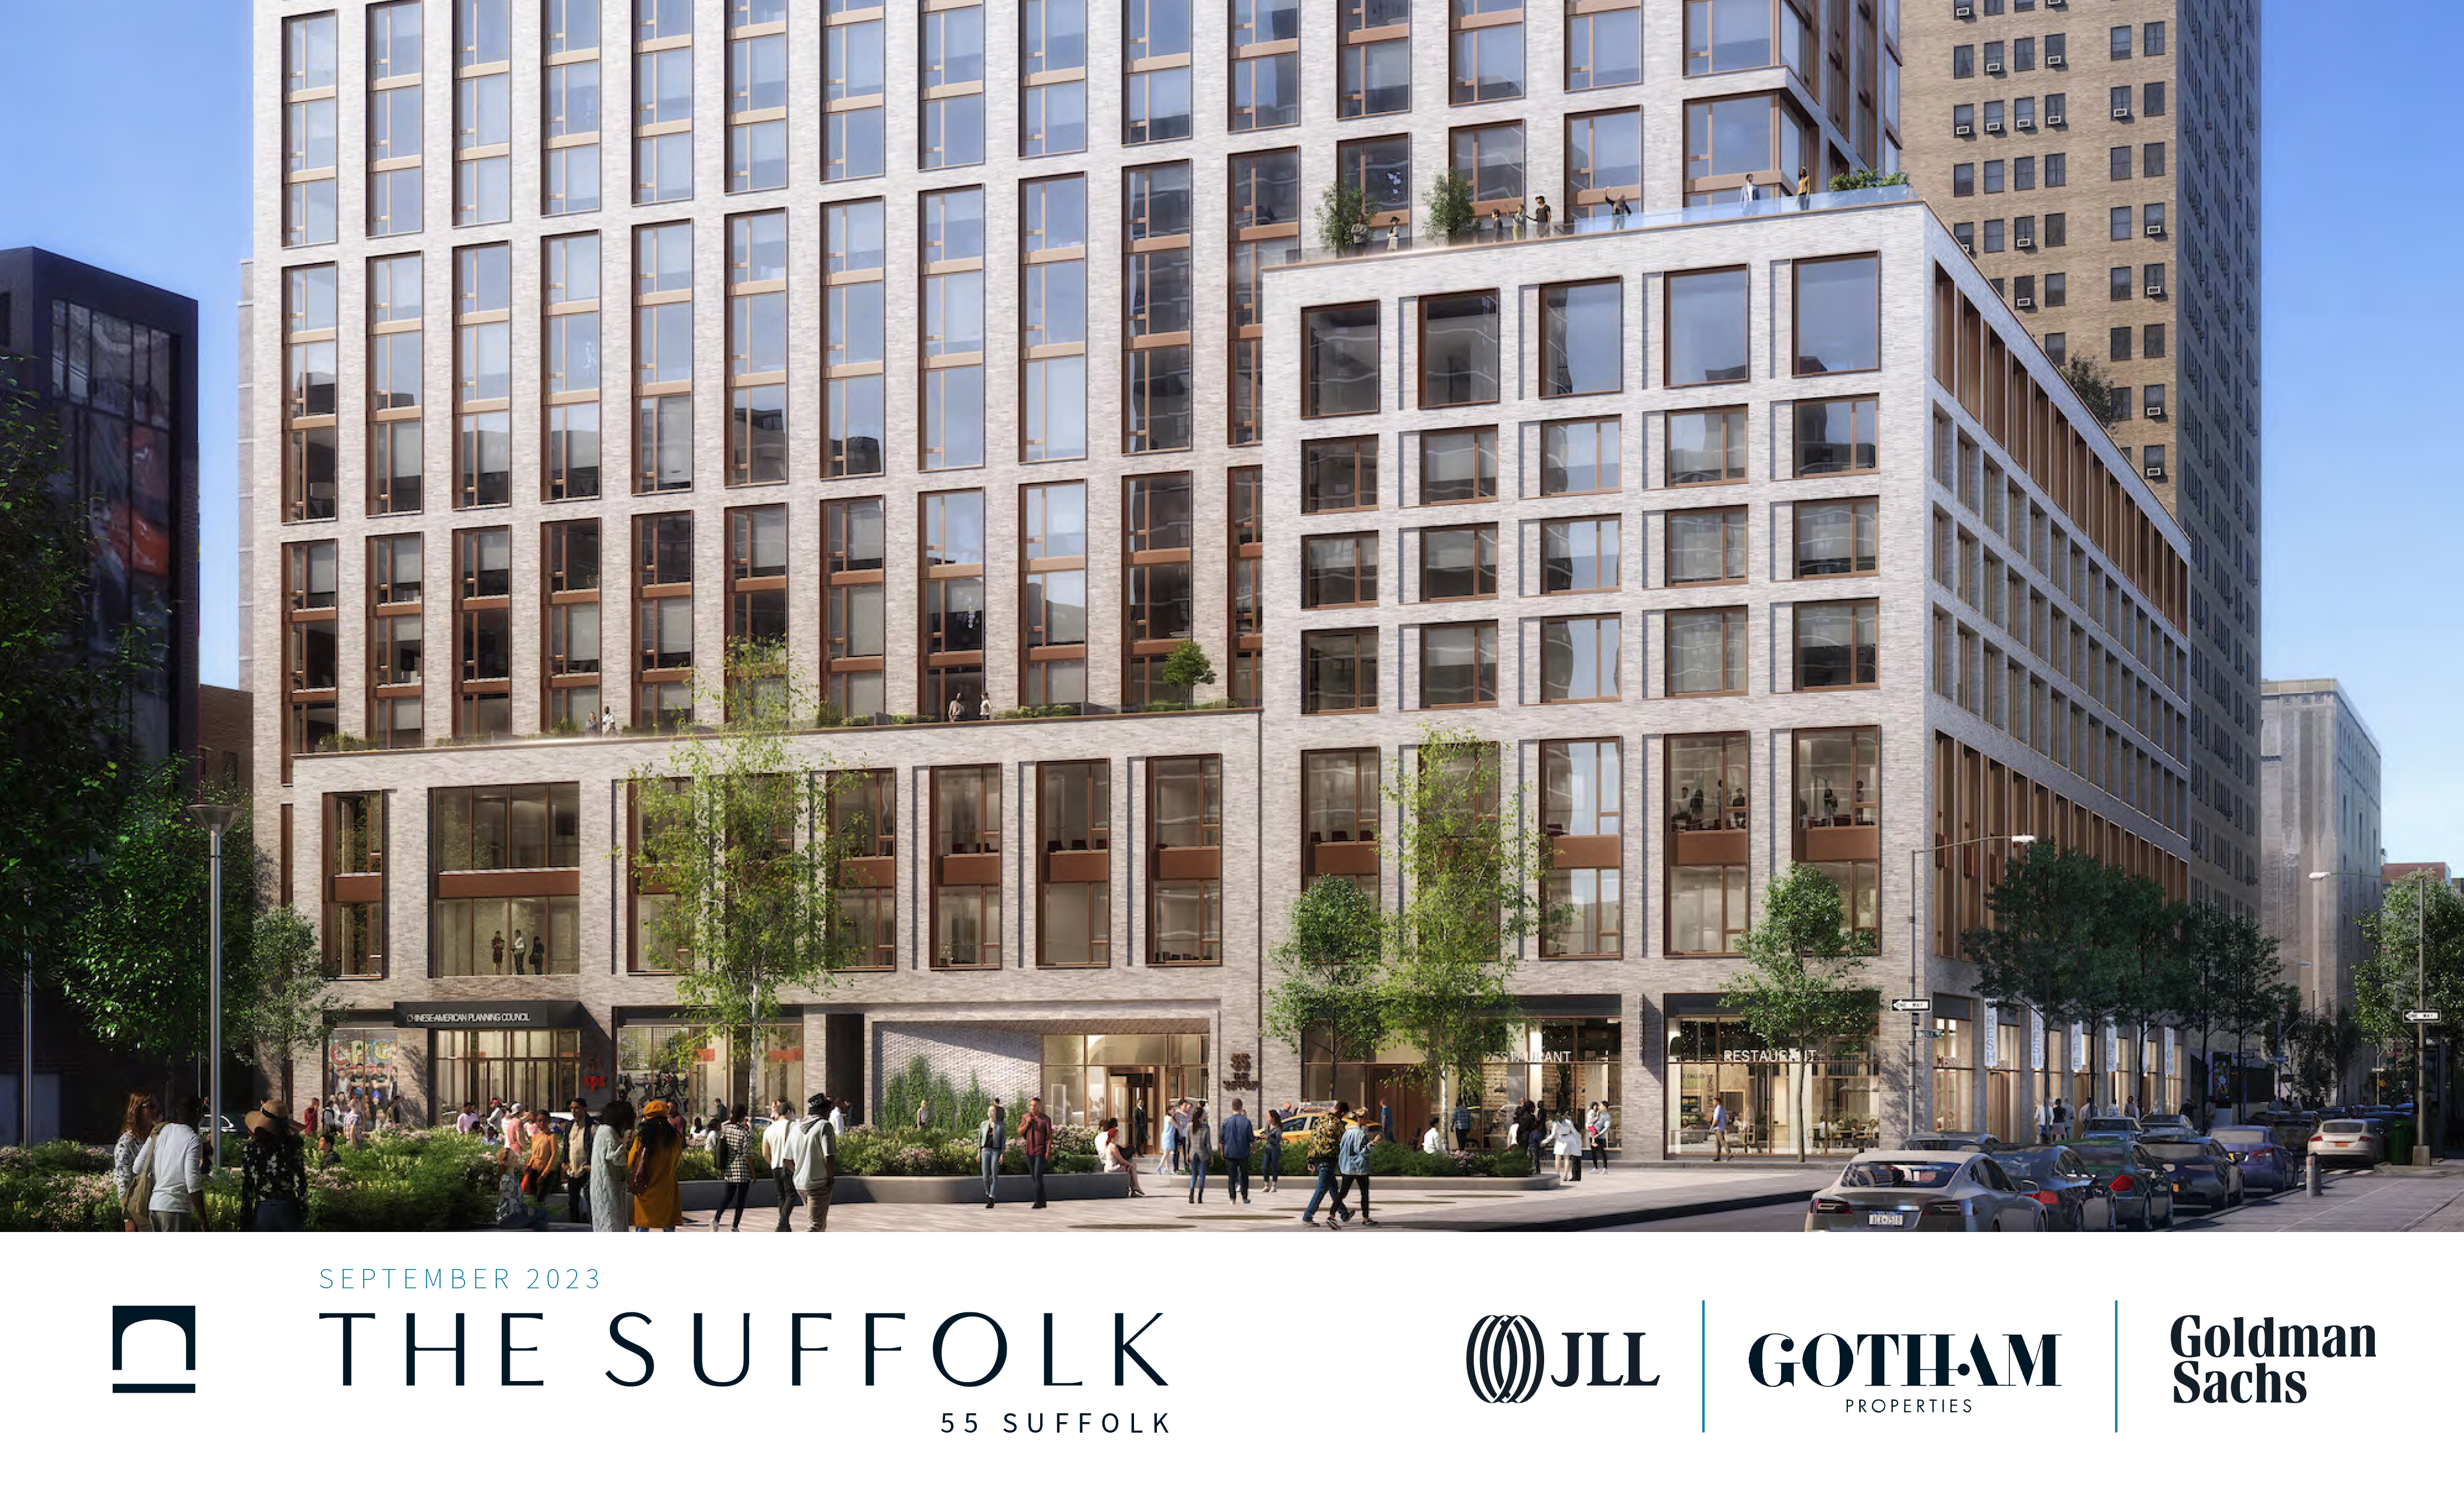 JLL / HFF, 55 Suffolk Street, The Suffolk, New York, pitch, sales enablement, cover